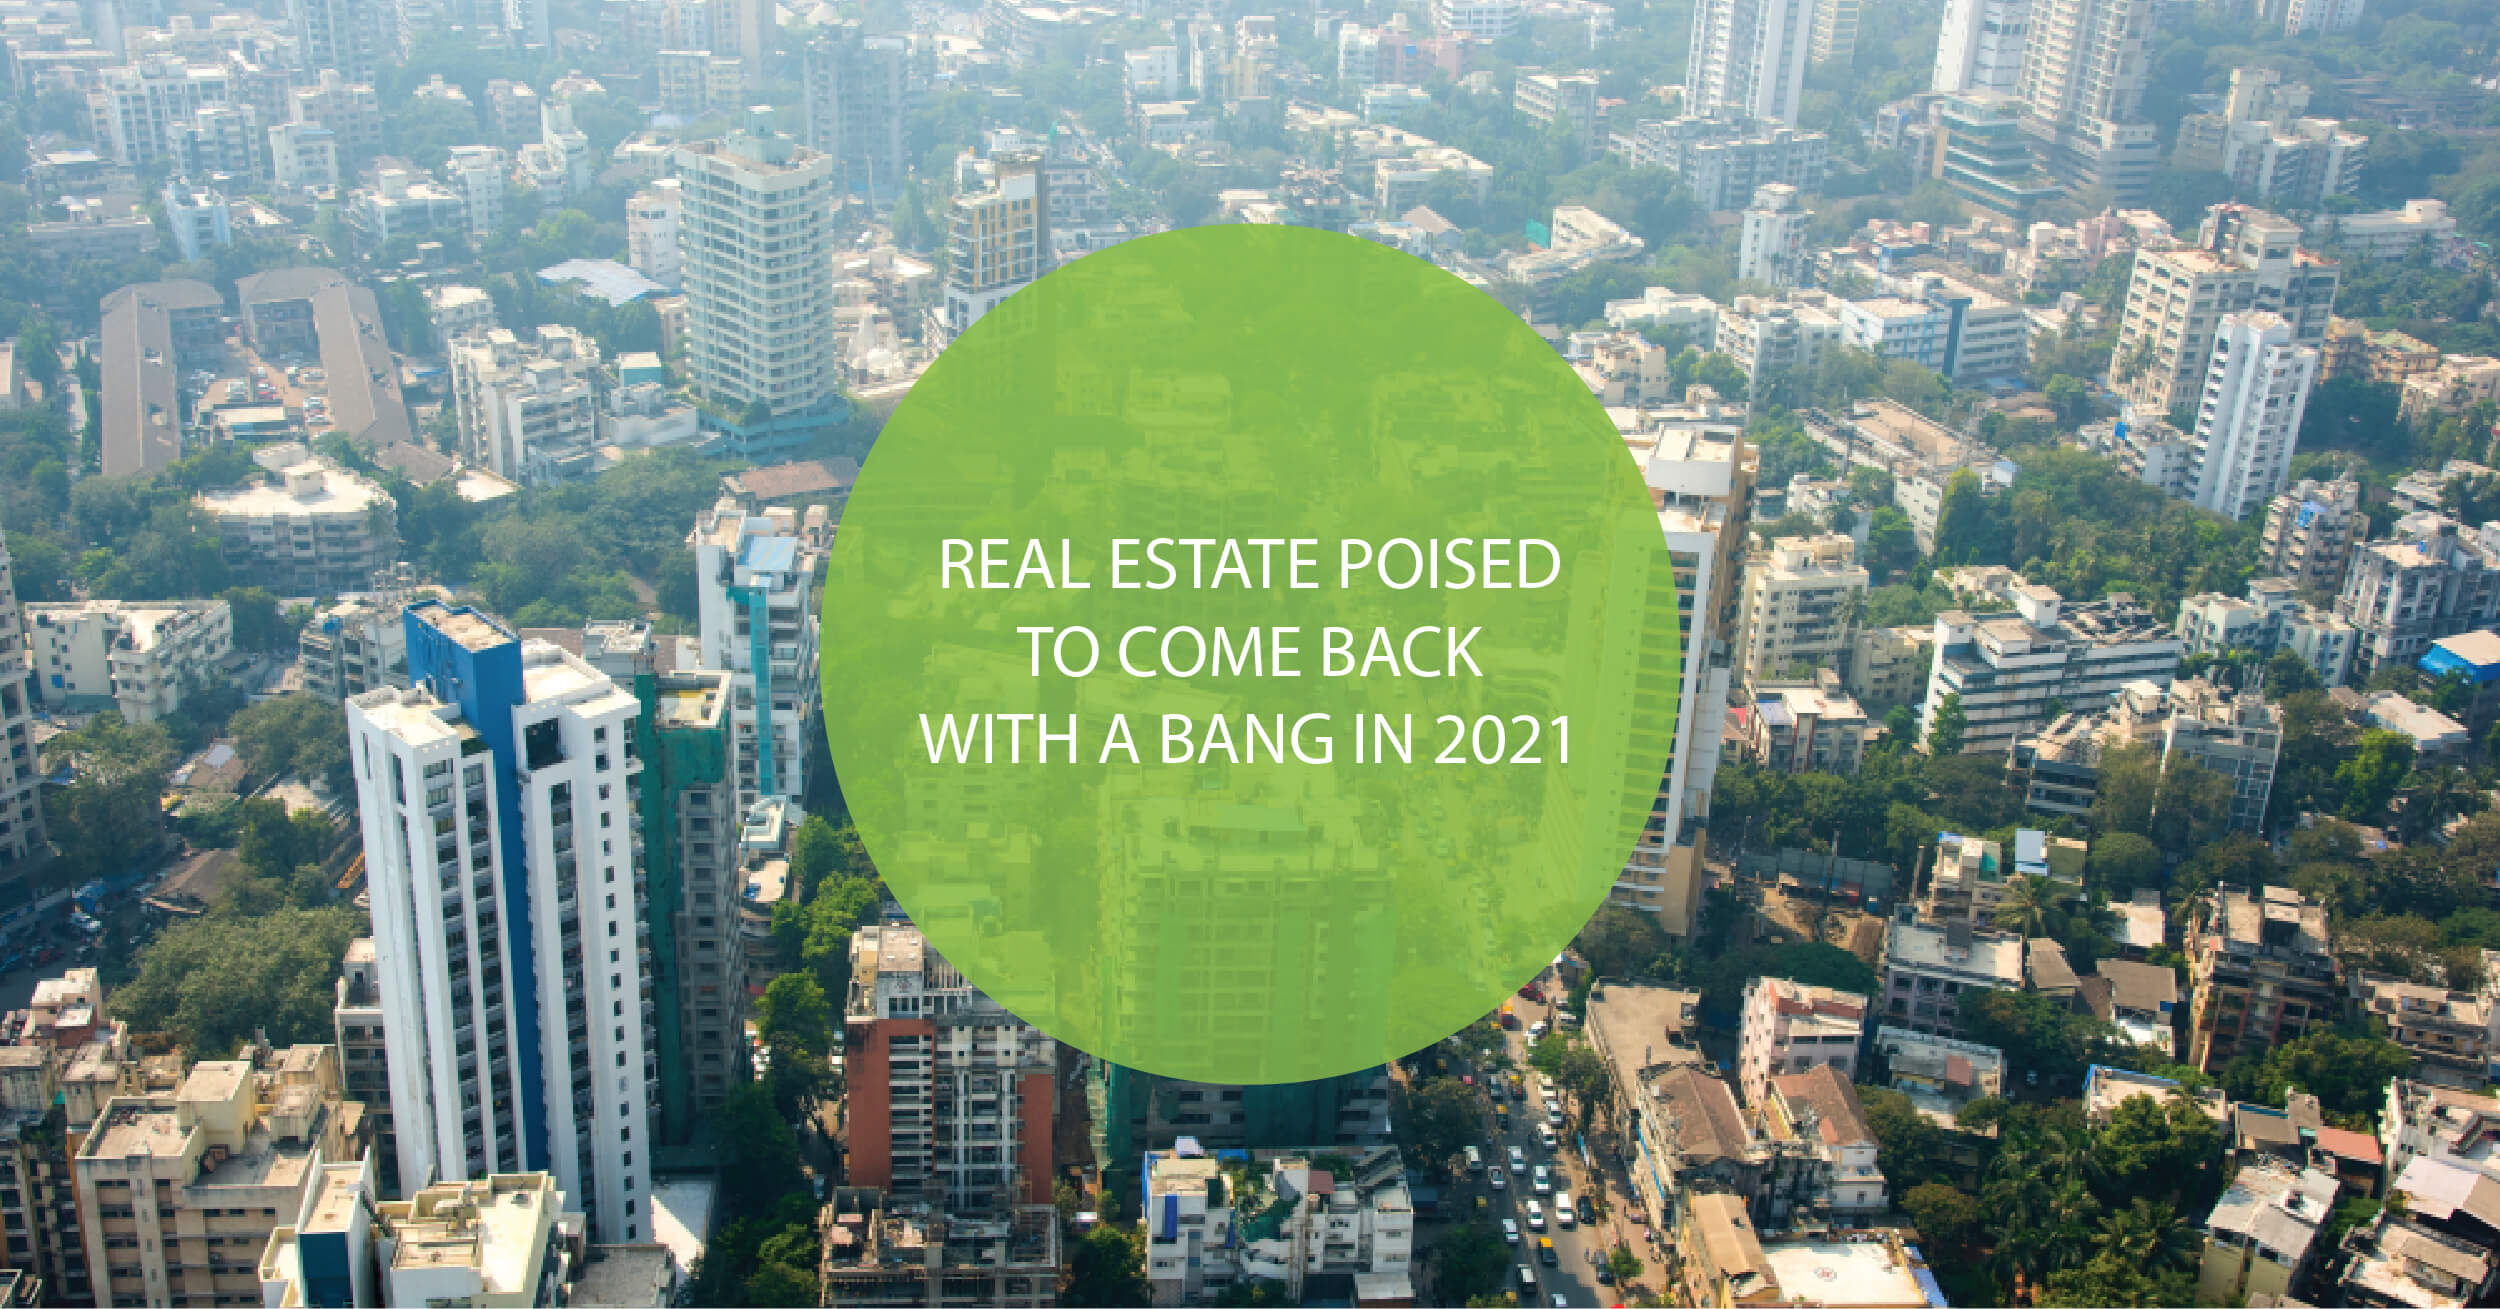 Real Estate Poised To Come Back With a Bang in 2021